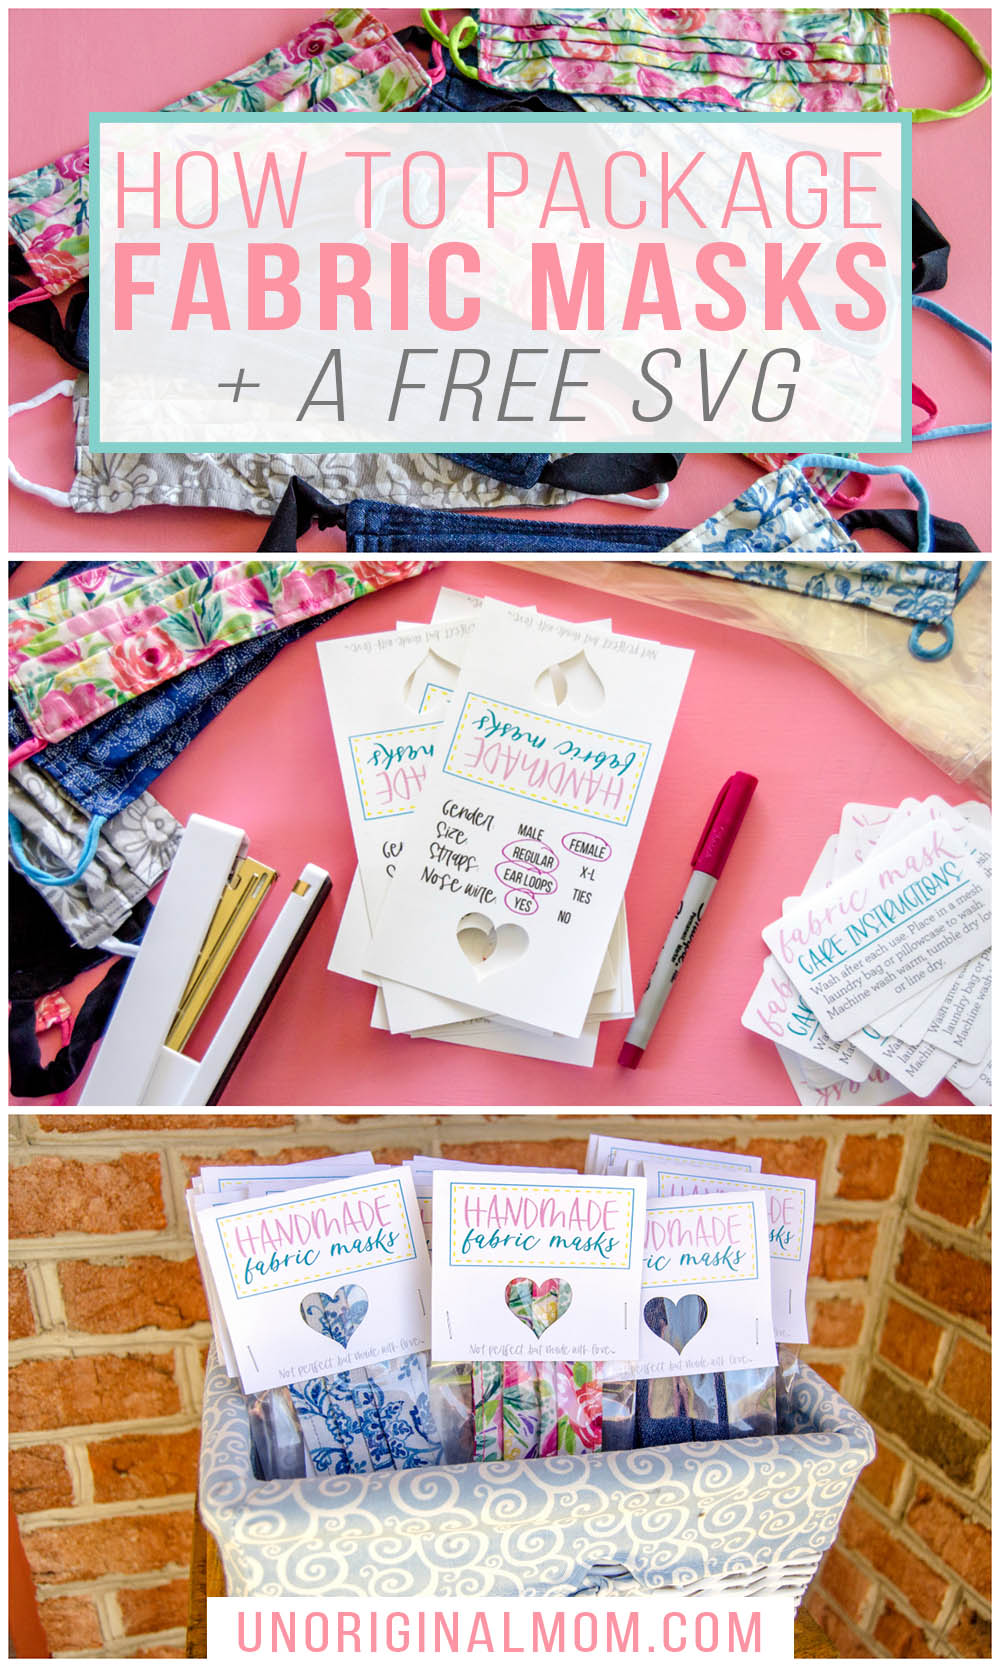 How to package fabric masks to sell or gift, plus a free print-and-cut SVG to use with your Silhouette or Cricut! #fabricmasks